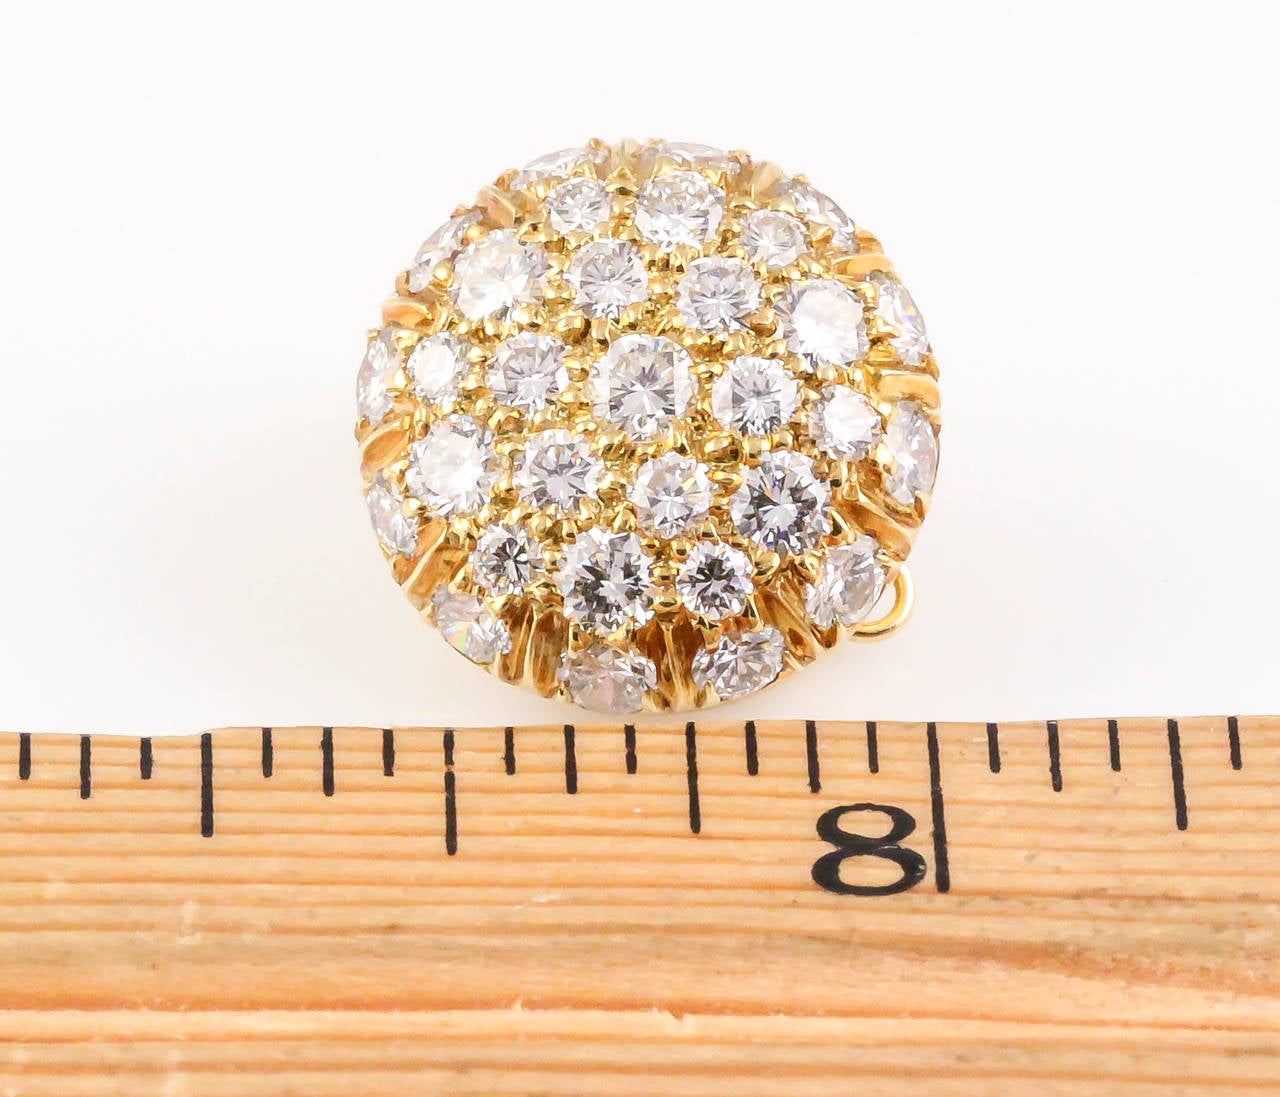 Classic diamond and 18K yellow gold button earrings by Harry Winston. They feature very high grade round brilliant cut diamonds, approx. 4.5-5.0 carats total weight.
Hallmarks: Winston, maker's mark, 750 OR.